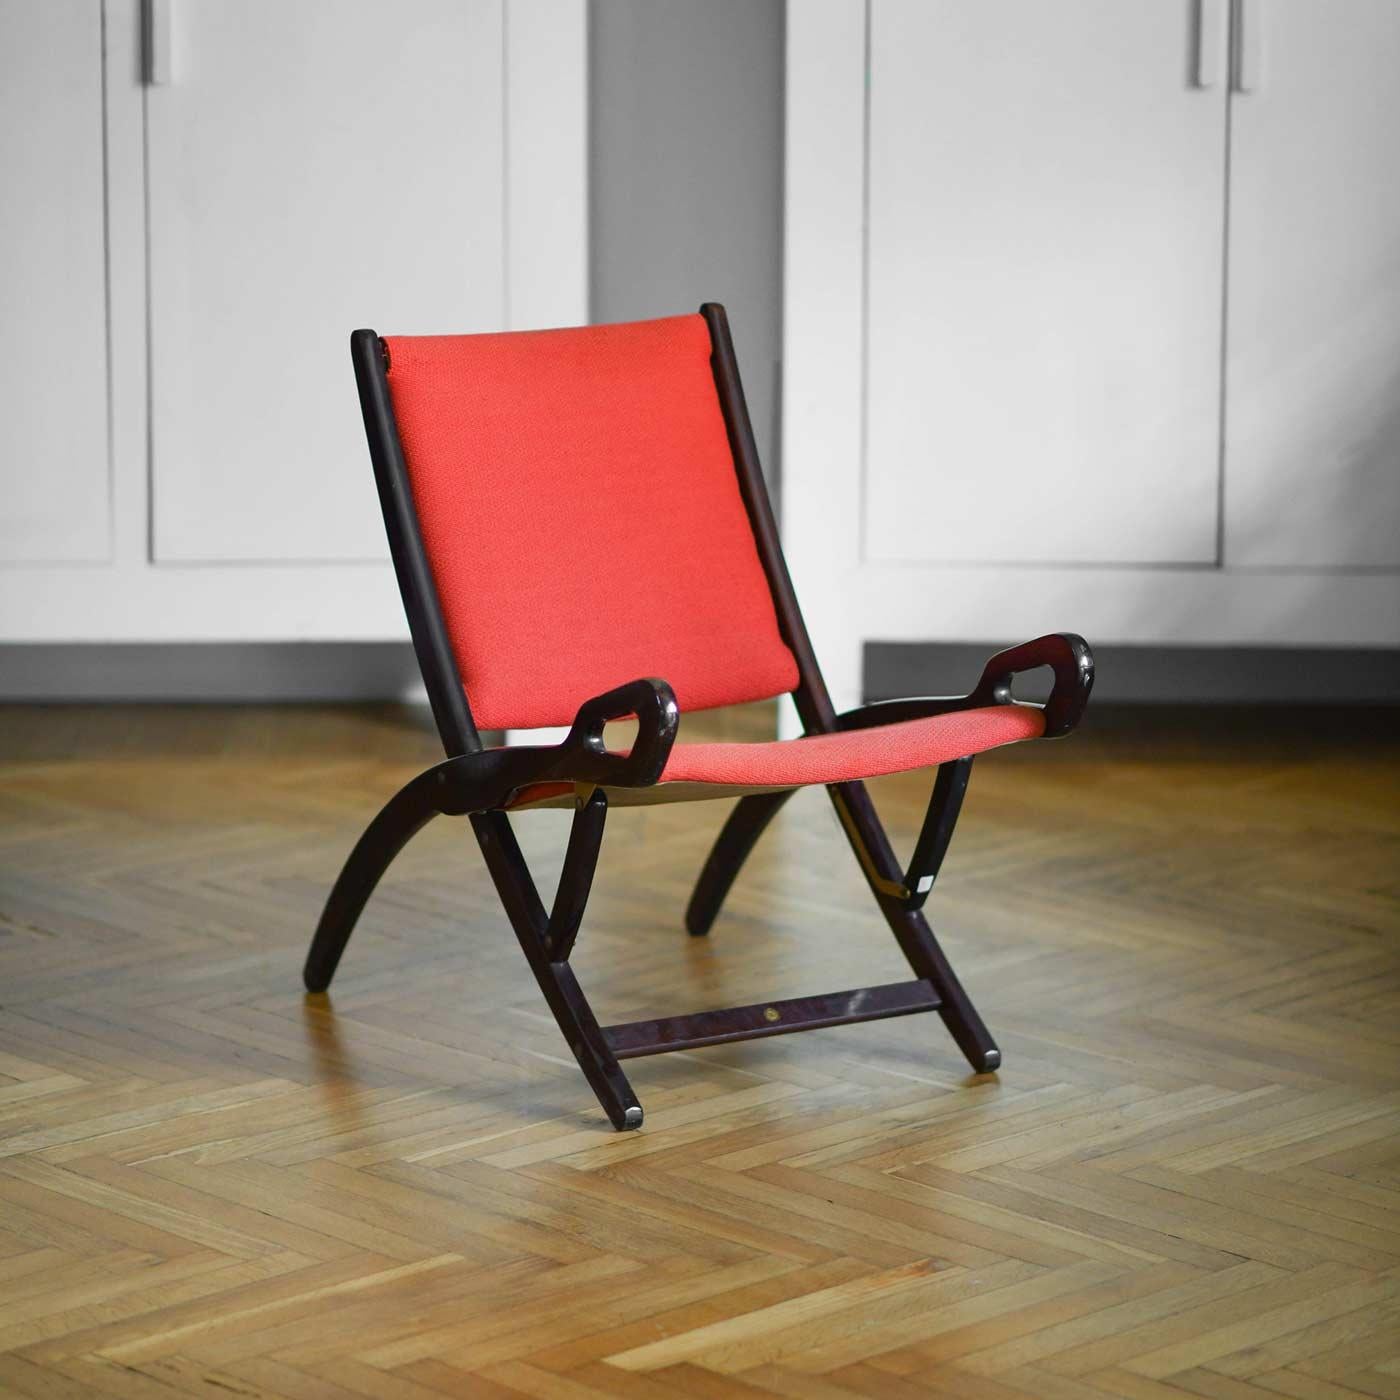 “NINFEA” Chair Gio Ponti 1950
“Ninfea” model folding chair with polished wooden structure and covering in
red fabric. Production by the Reguitti brothers 1950
Dimensions: 48 W x 70 H x 78 D cm
Materials: wood, fabric, foam.
Production by